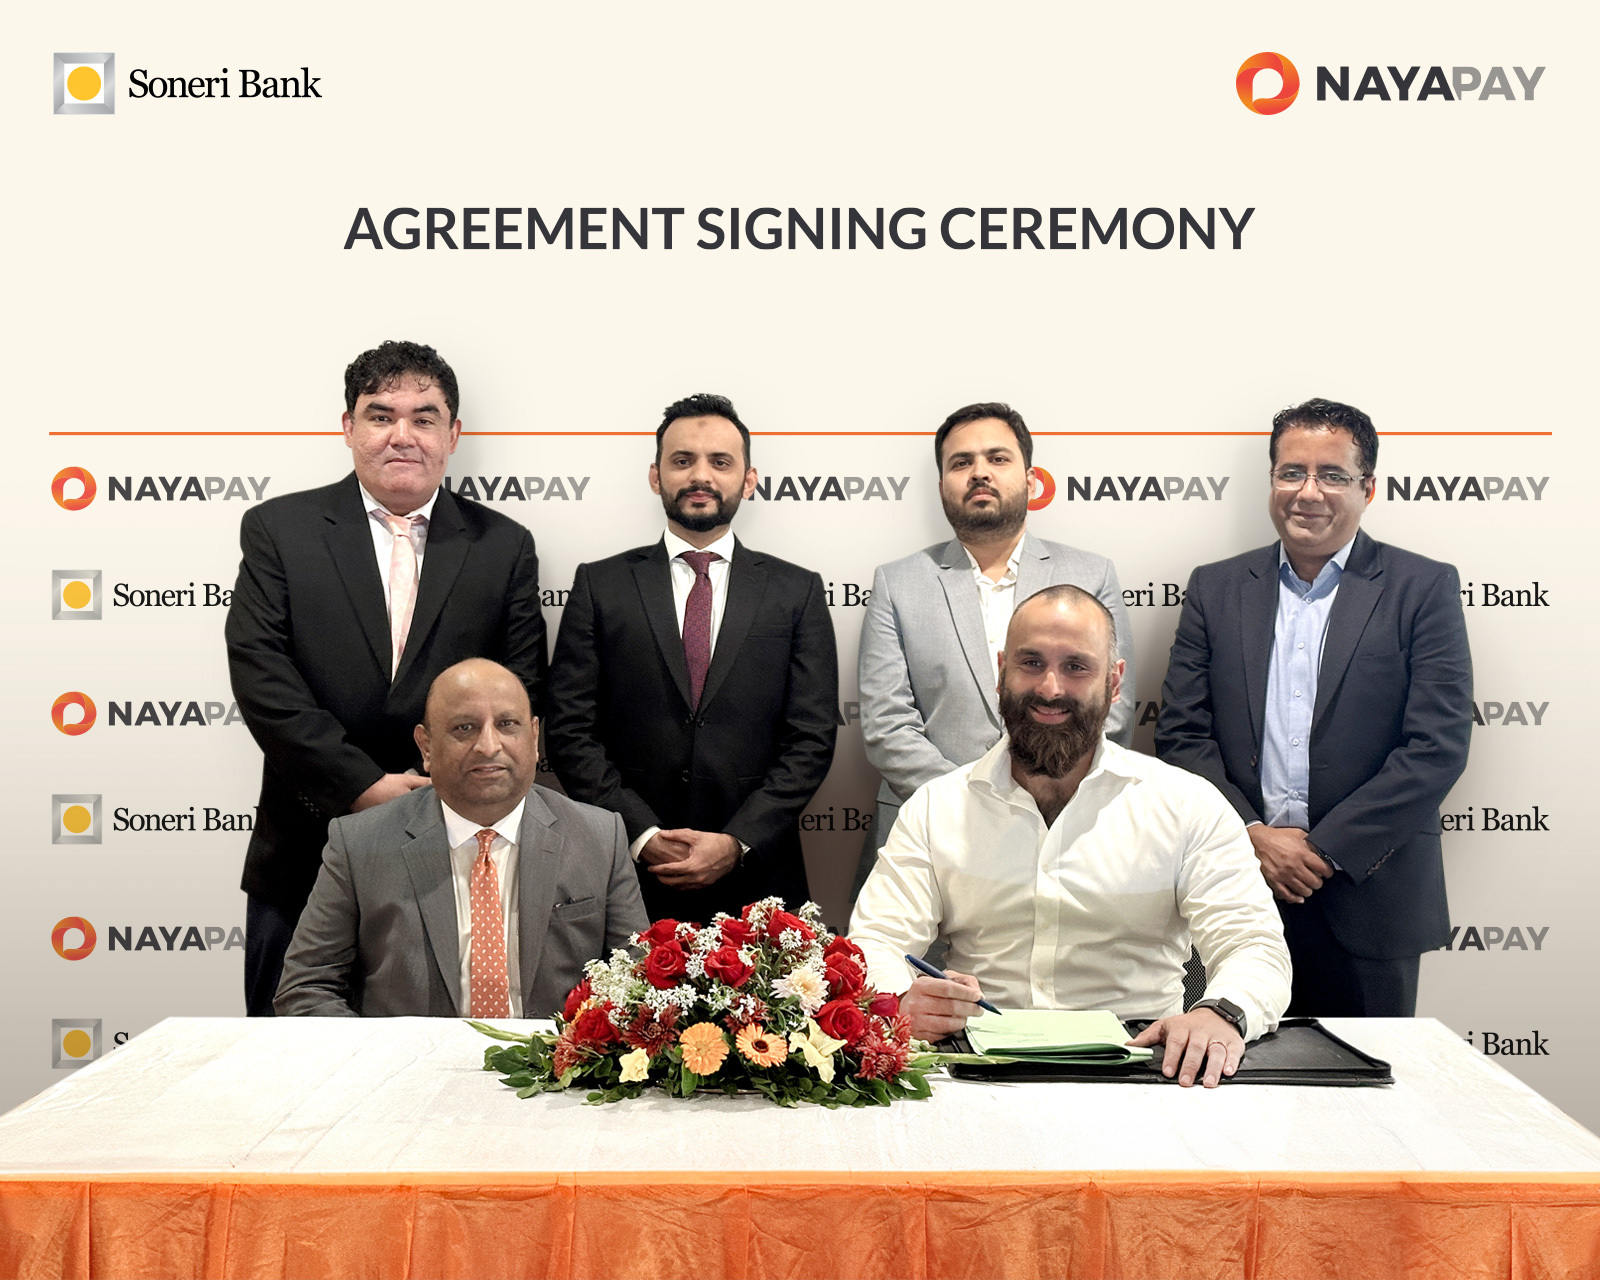 Soneri Bank joins forces with NayaPay as one of its partner banks